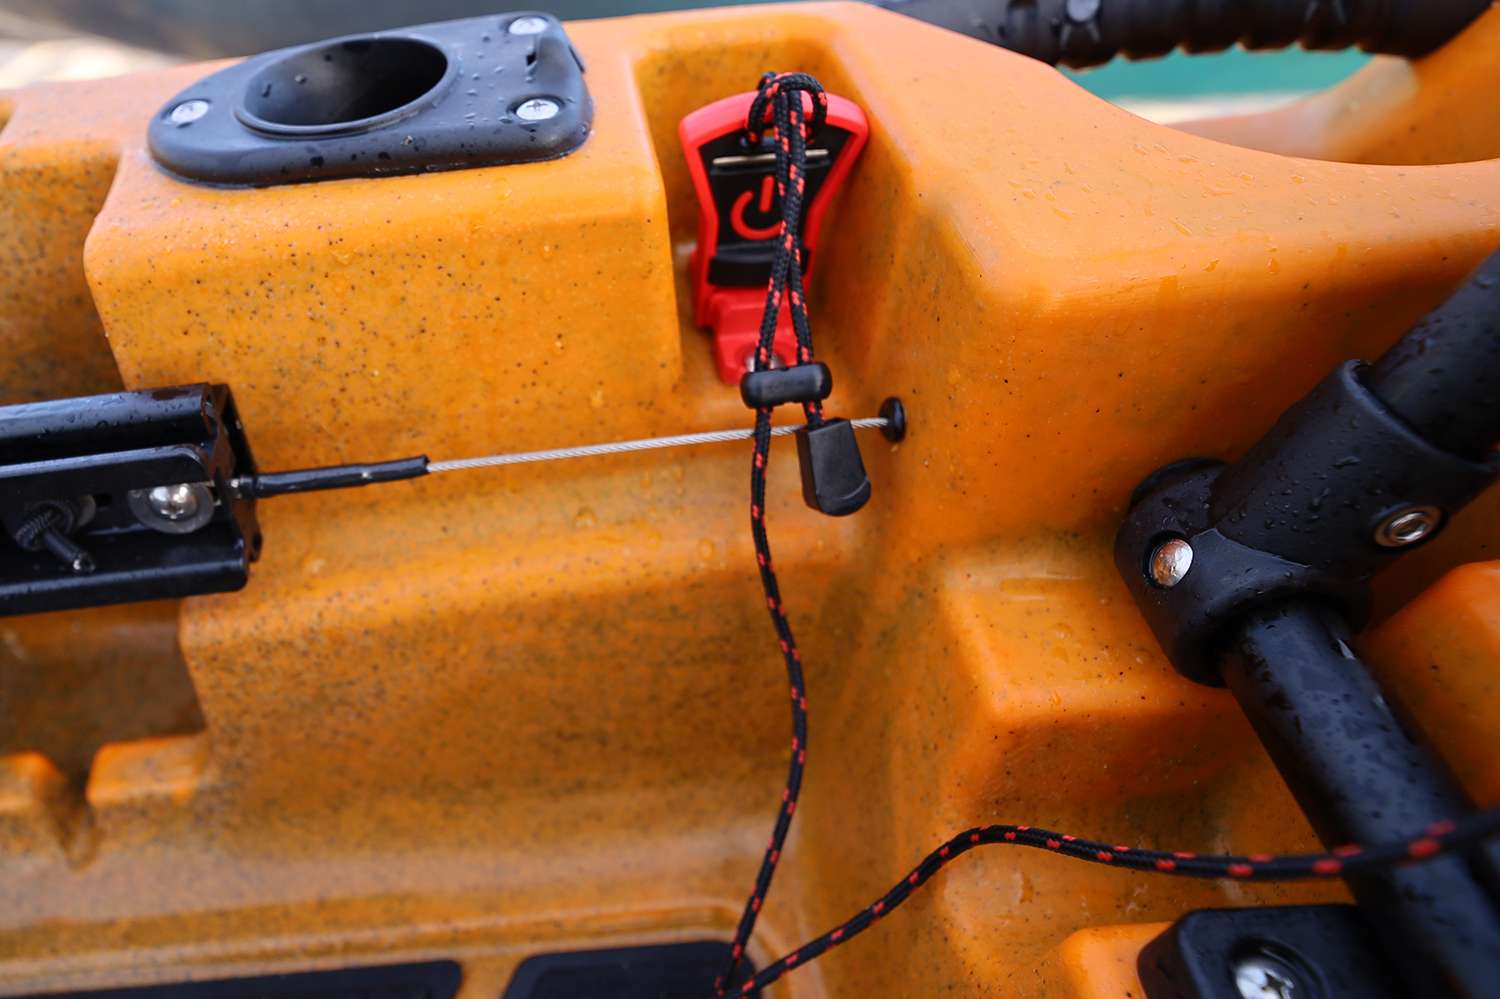 That clip magnetically attaches to the base knob, and when removes the power is cut to the trolling motor. 